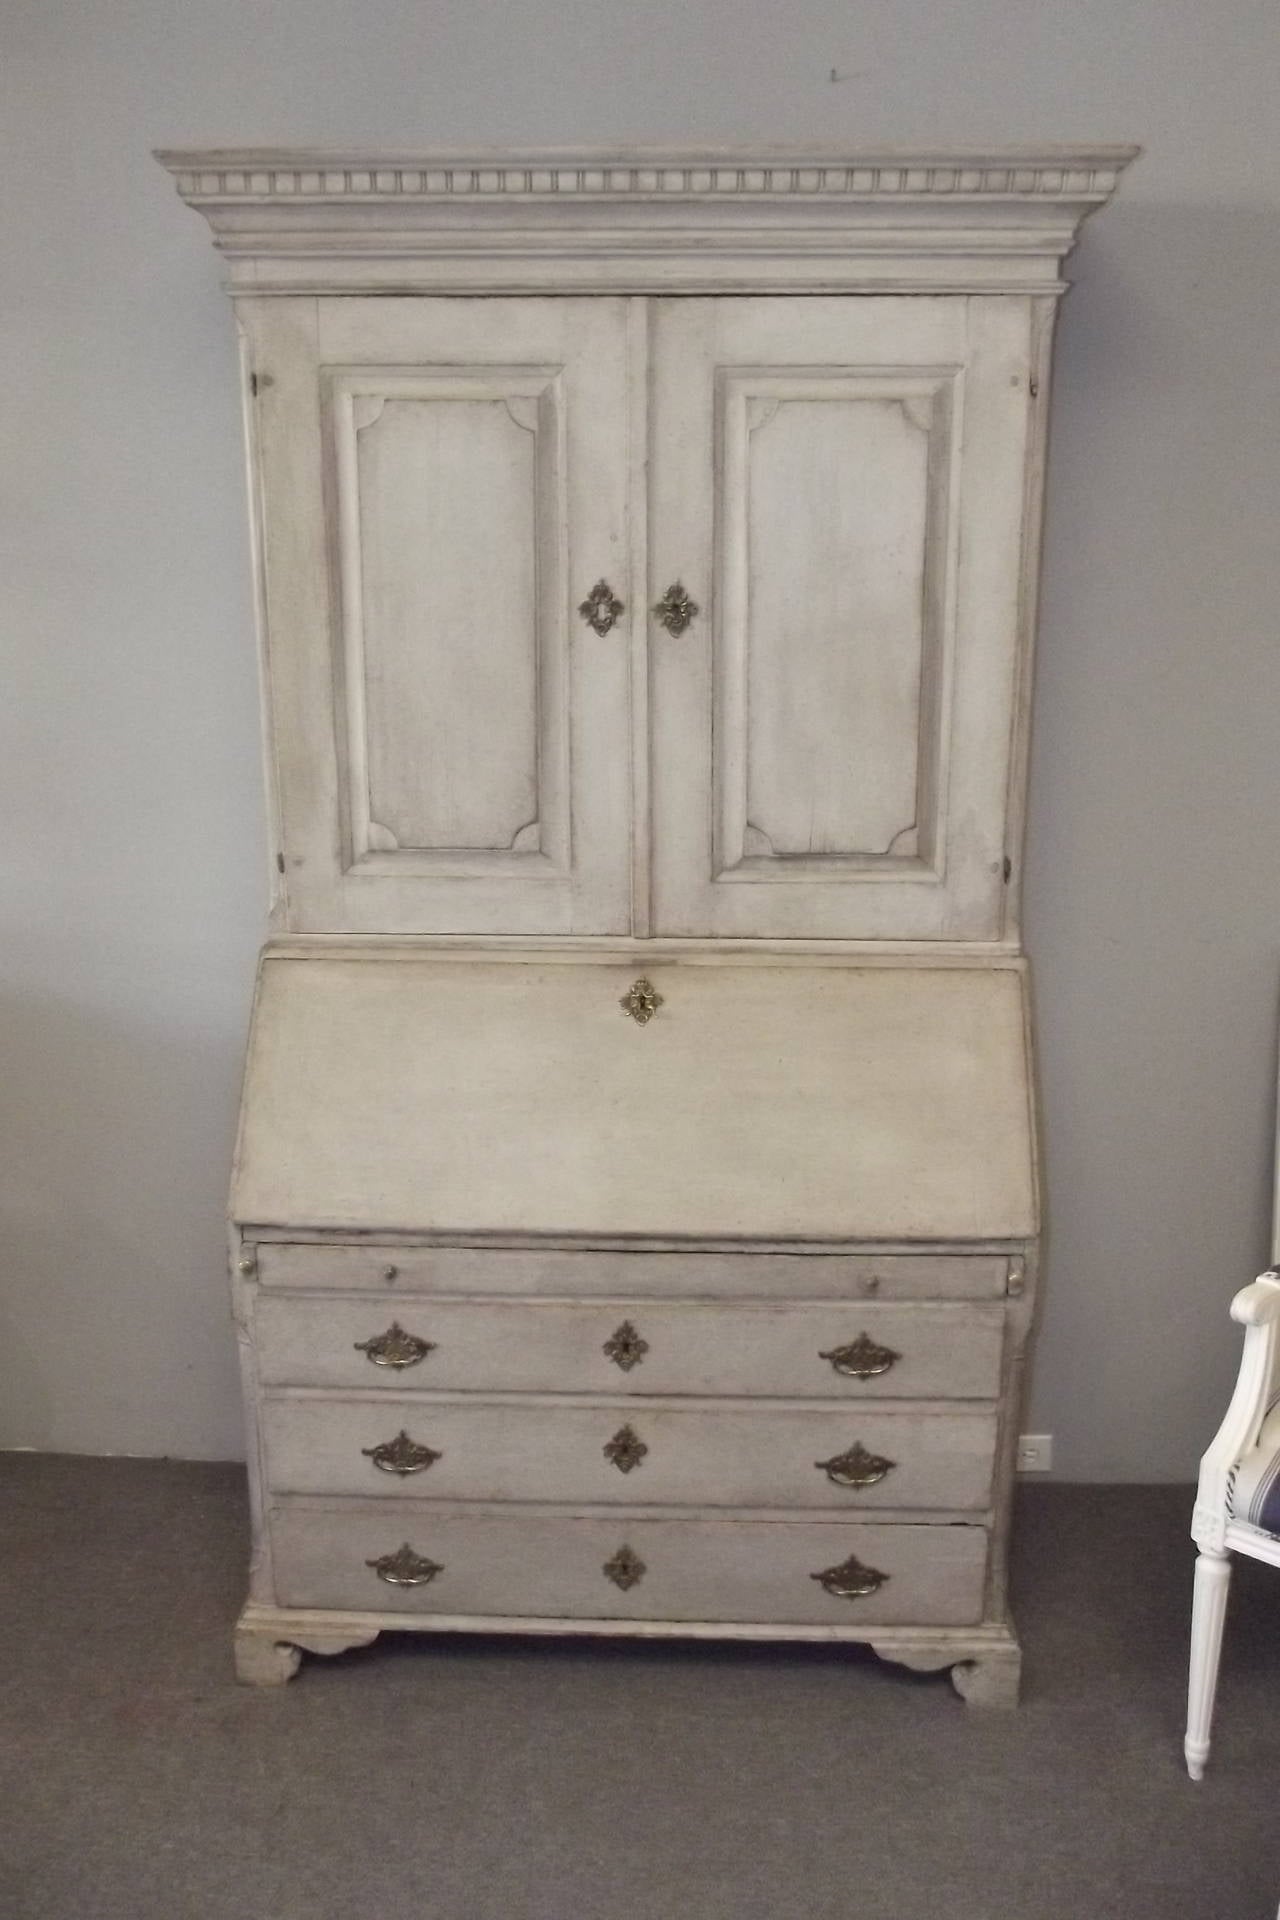 A Swedish secretary desk dating from the end of the Gustavian period in old but not original white painted surface. It is in excellent overall condition with wonderful cherub brasses and a detailed interior. There is overall beautiful detailing